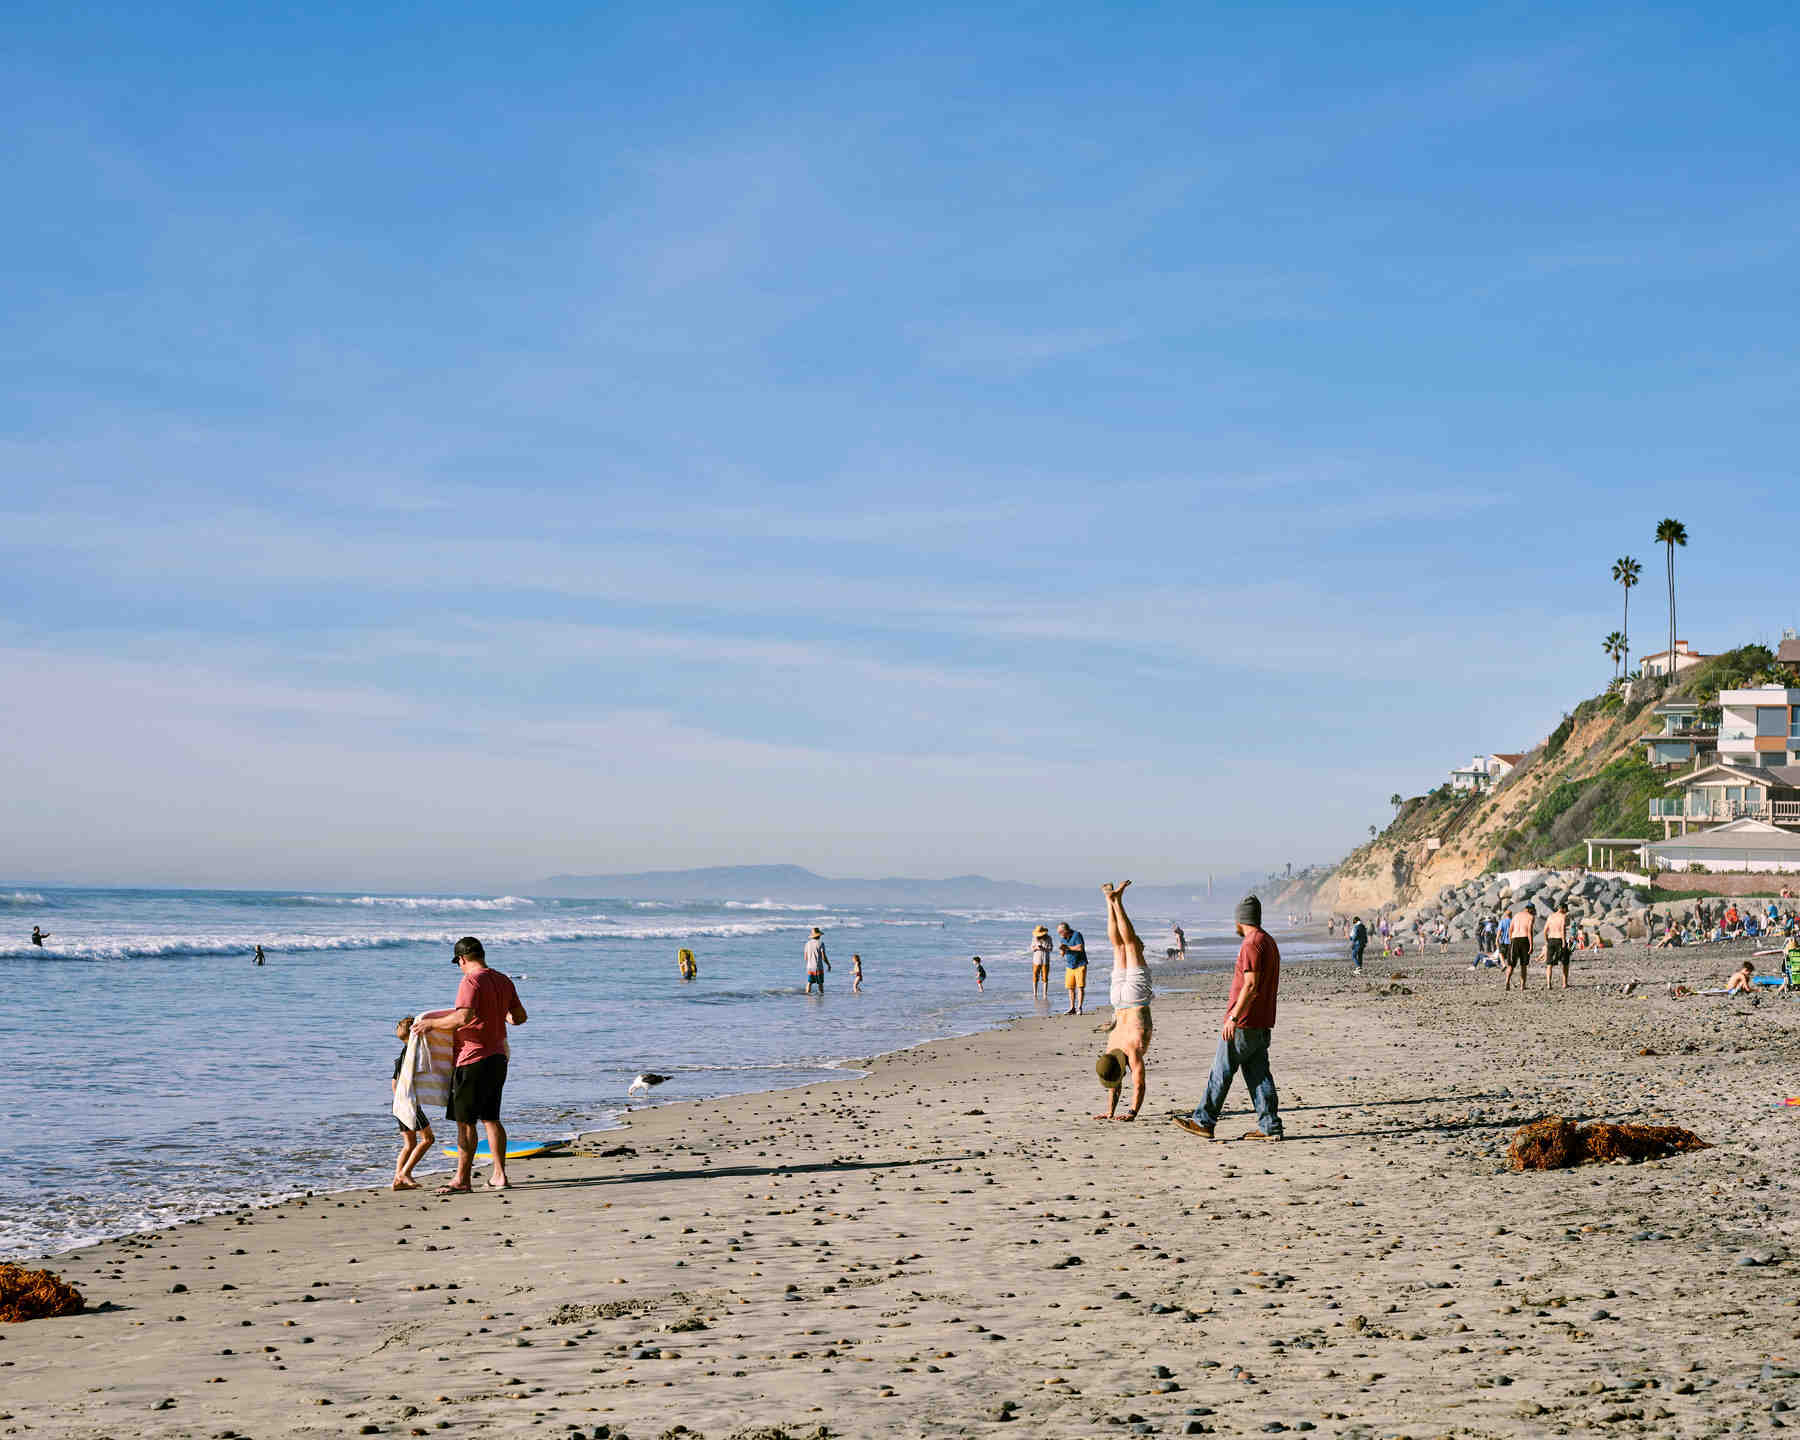 Encinitas reopens popular Beacon’s Beach access after trail improvements